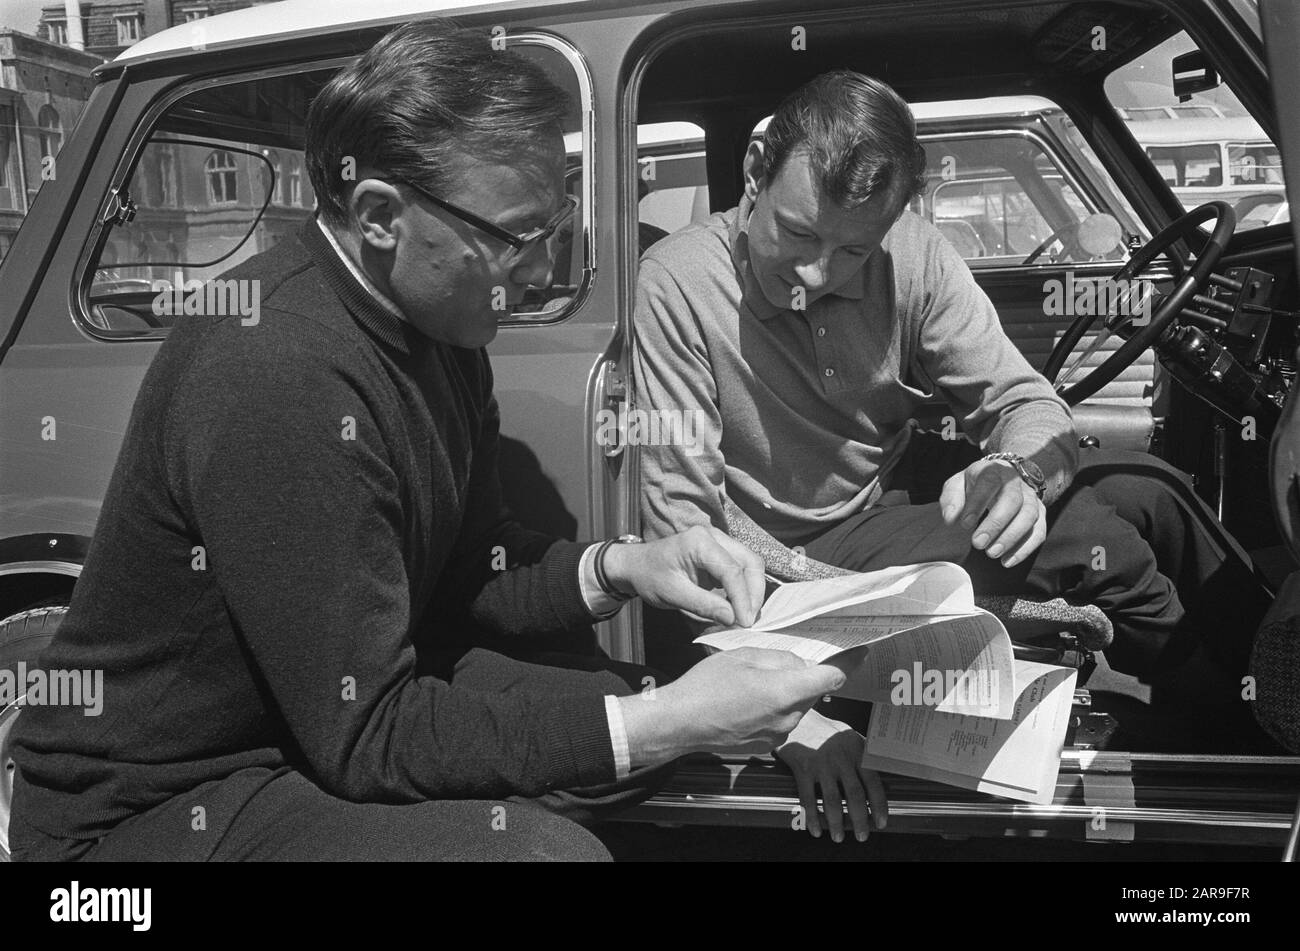 Preparations Tulpenrallye, number 27 Harper (right) and Turvey, number 28, 29 and 30 Aaltonen (right) and Liddon Date: April 25, 1966 Keywords: Preparations Setting name: Tulpenrally Stock Photo